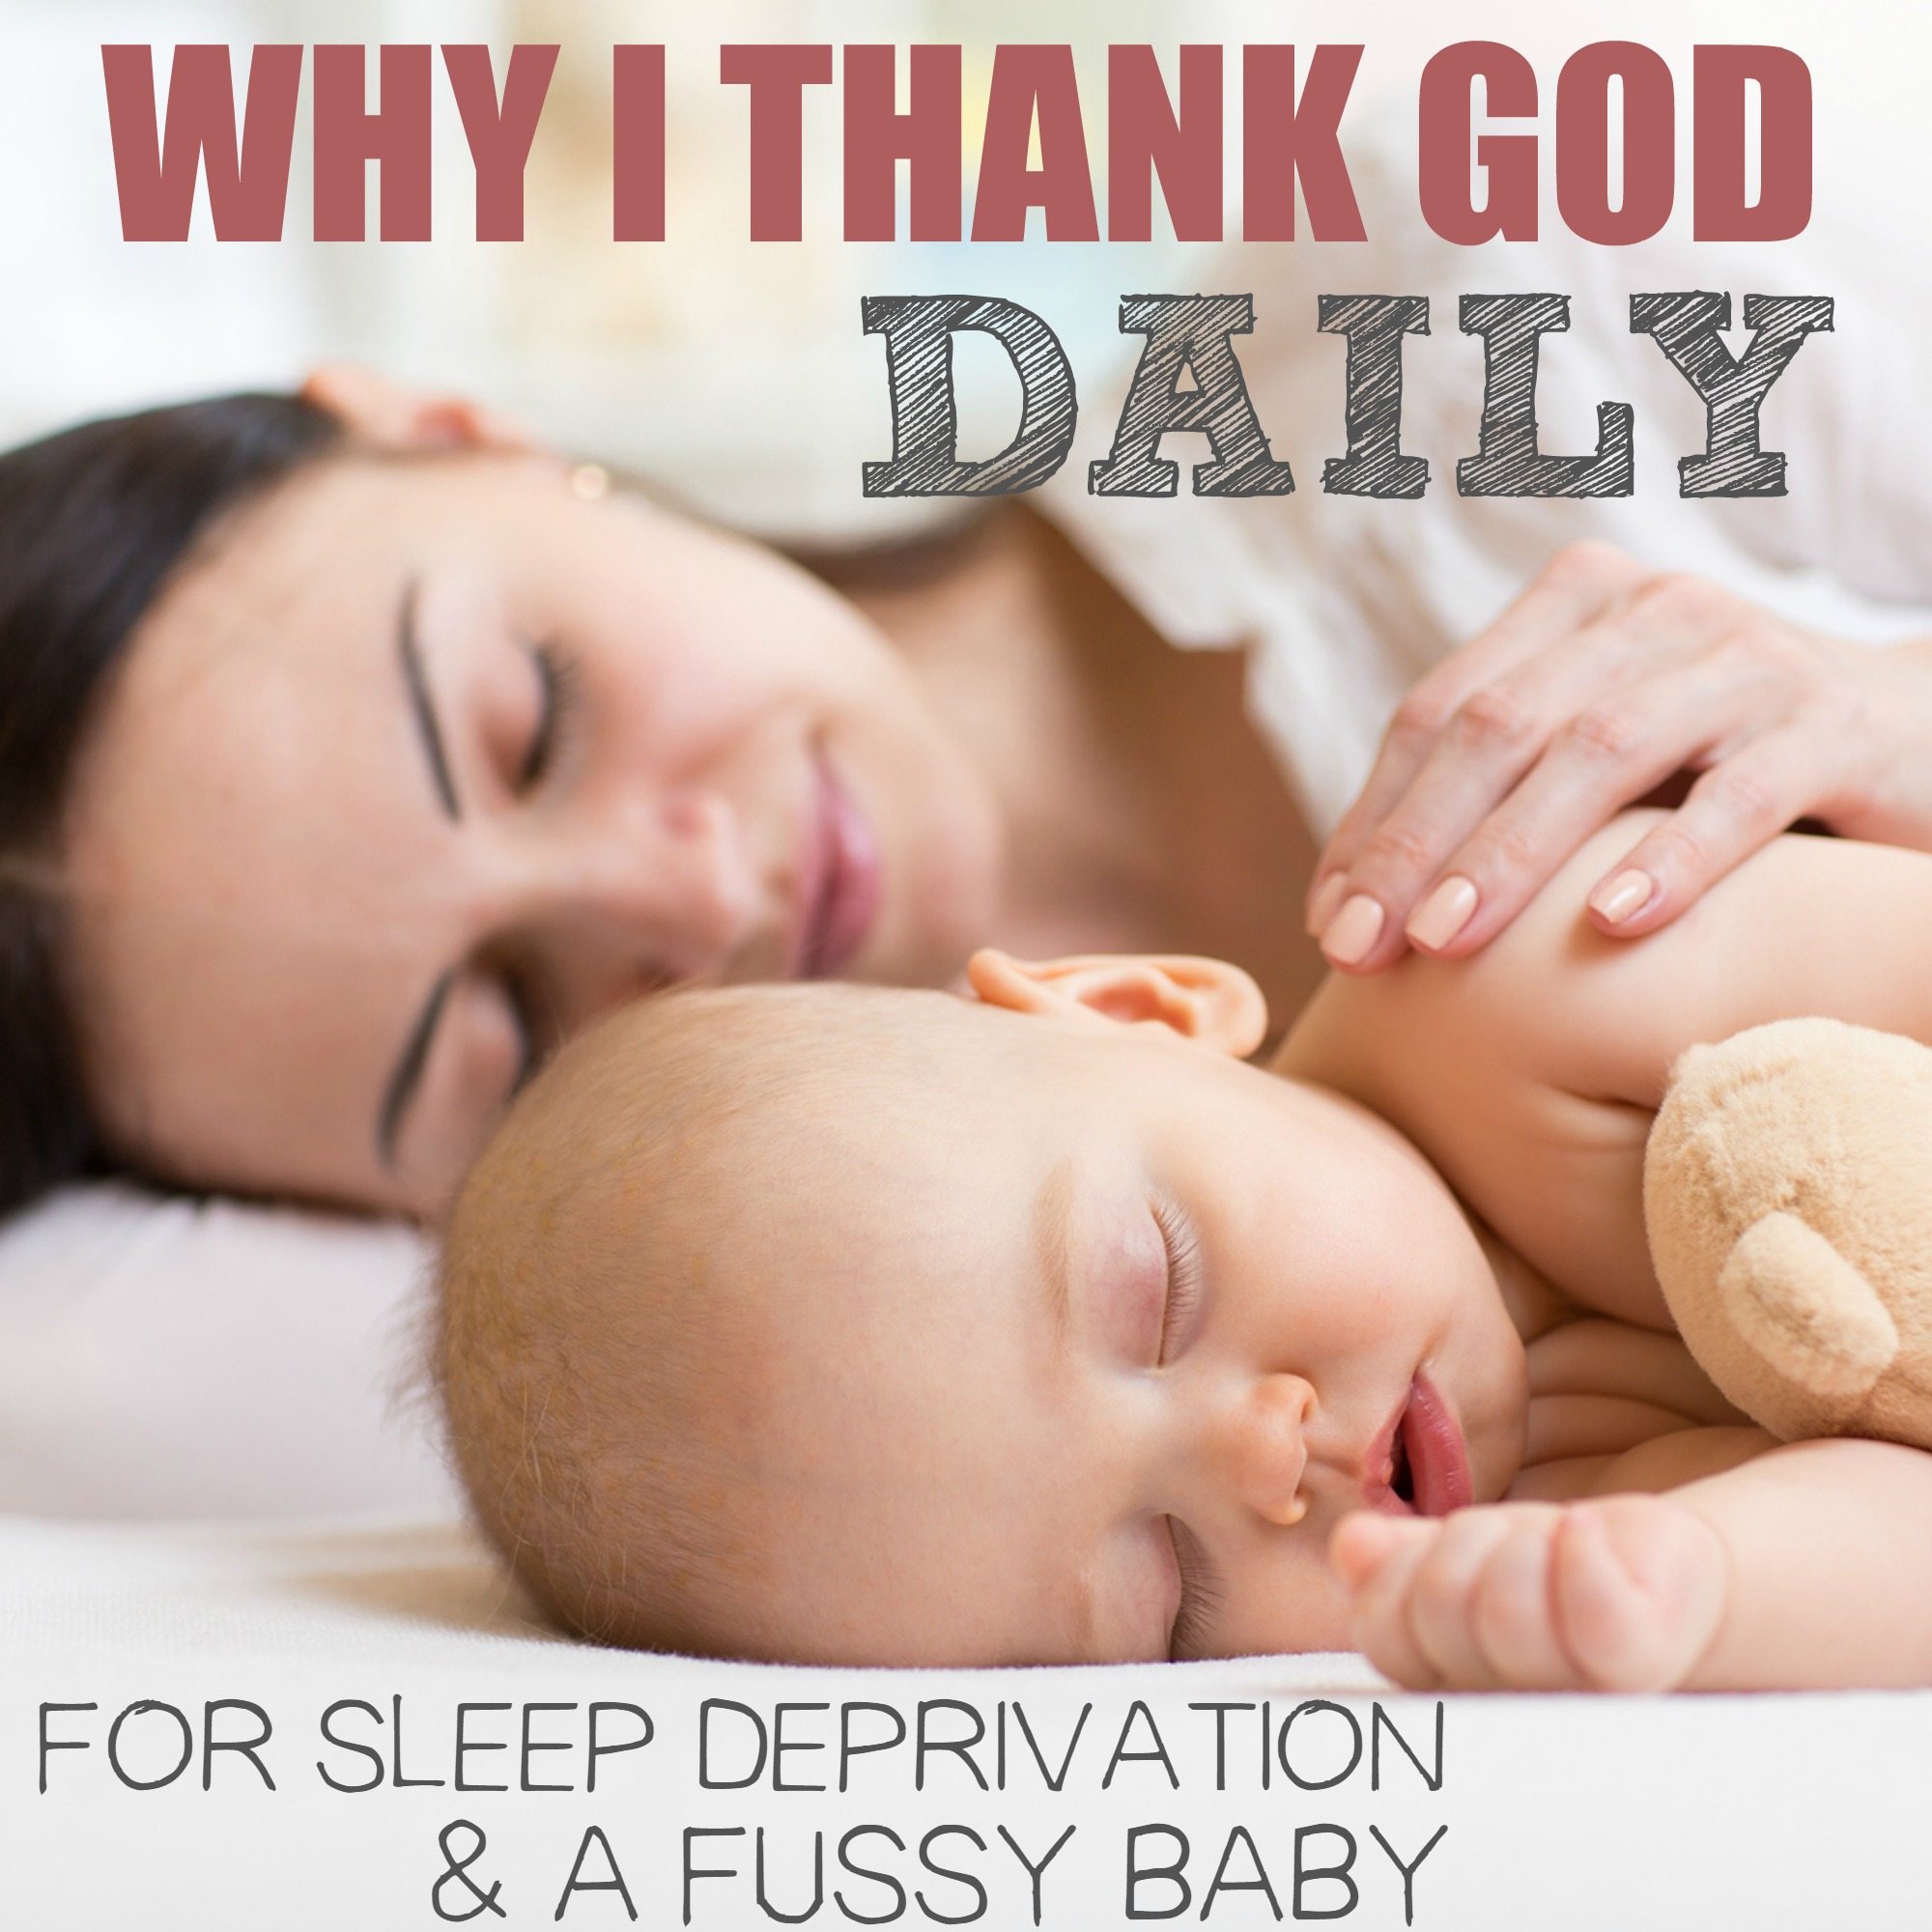 Why I THANK GOD Daily for Sleep Deprivation and a Fussy Baby